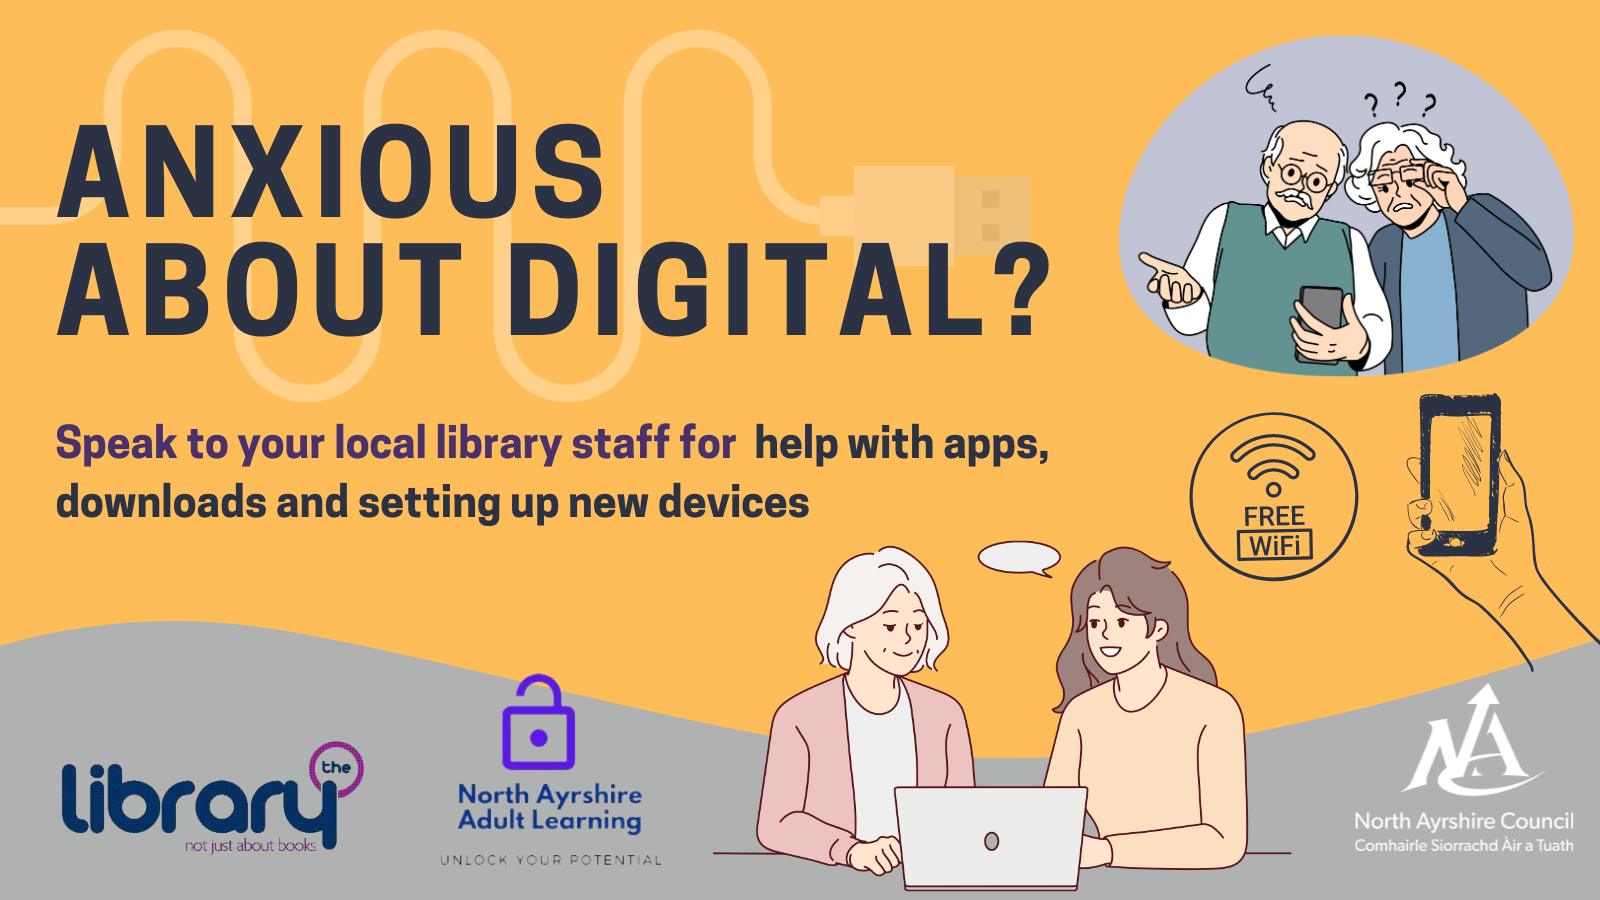 Anxious about digital - get digital support via North Ayrshire Libraries